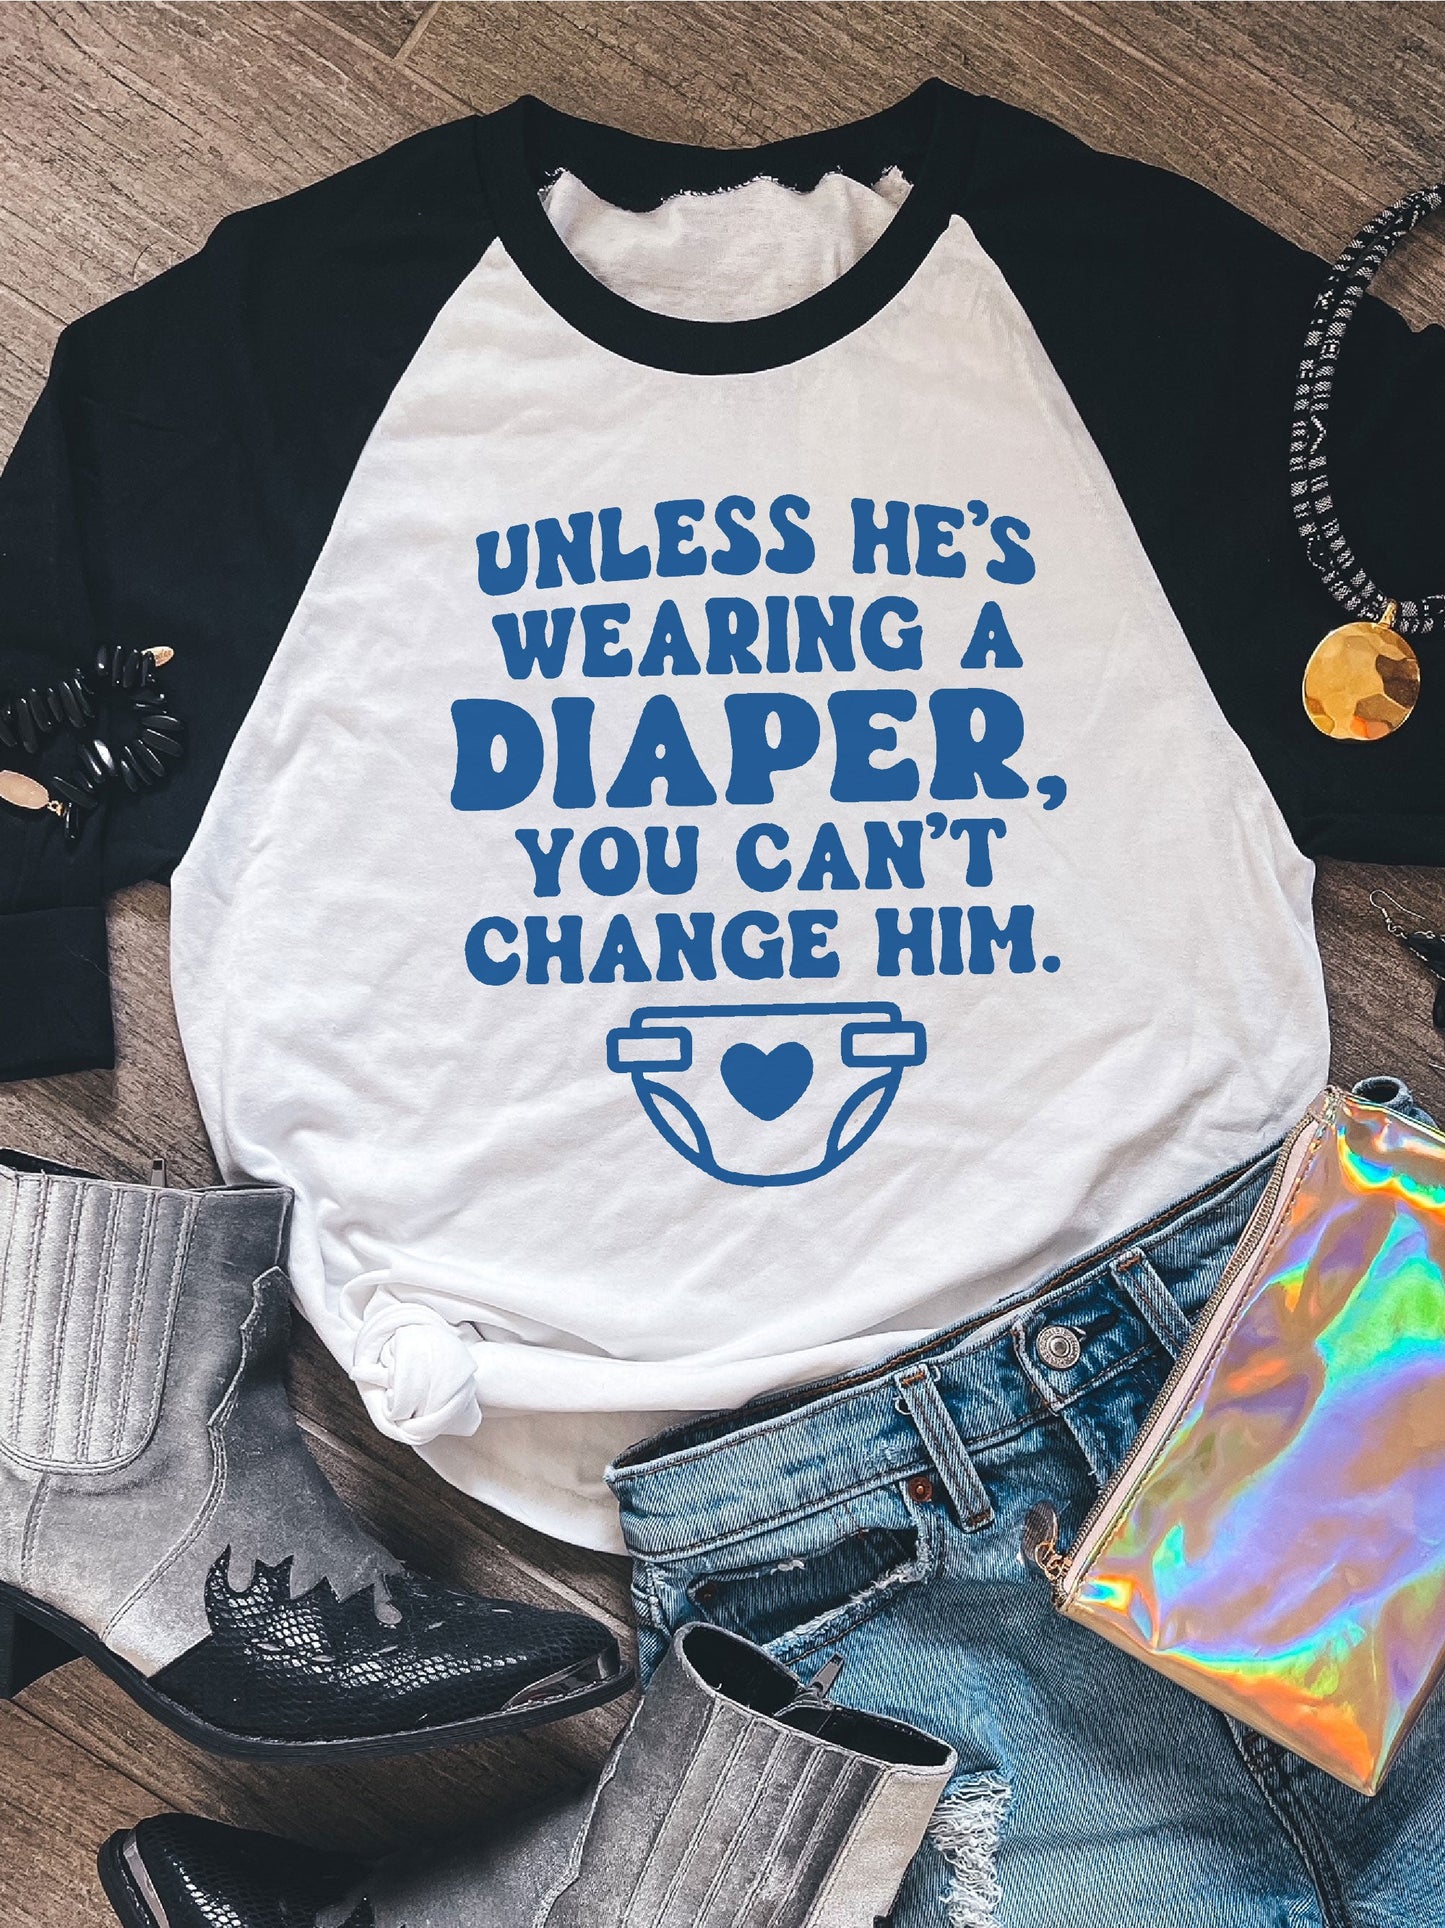 Unless He's Wearing A Diaper, You Can't Change Him.